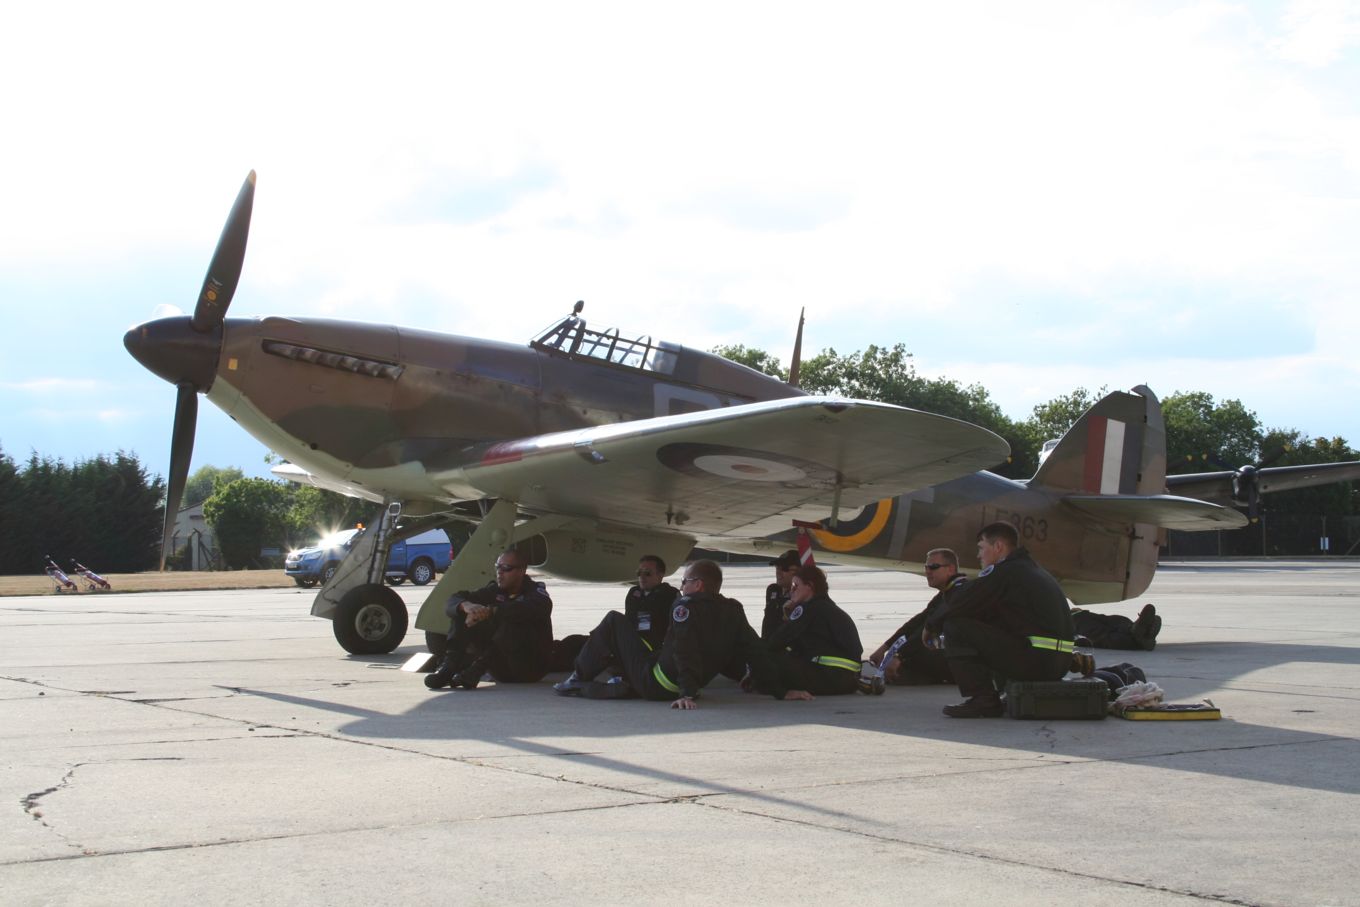 BBMF engineers sheltering from the sun in the shadow of a Hurricane